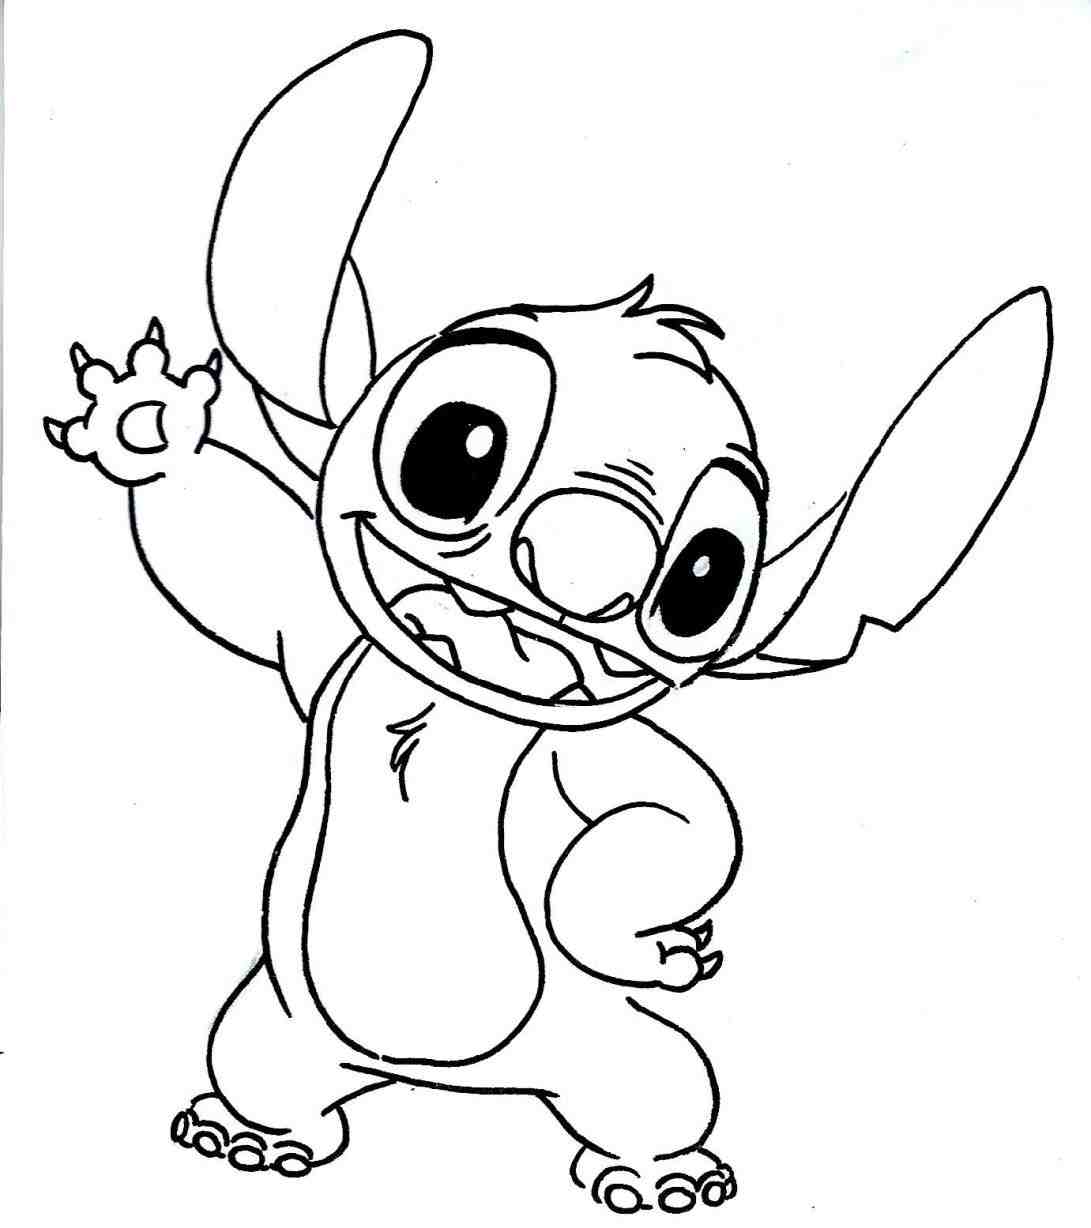 Disney Stitch Coloring Pages at GetColorings.com | Free ...